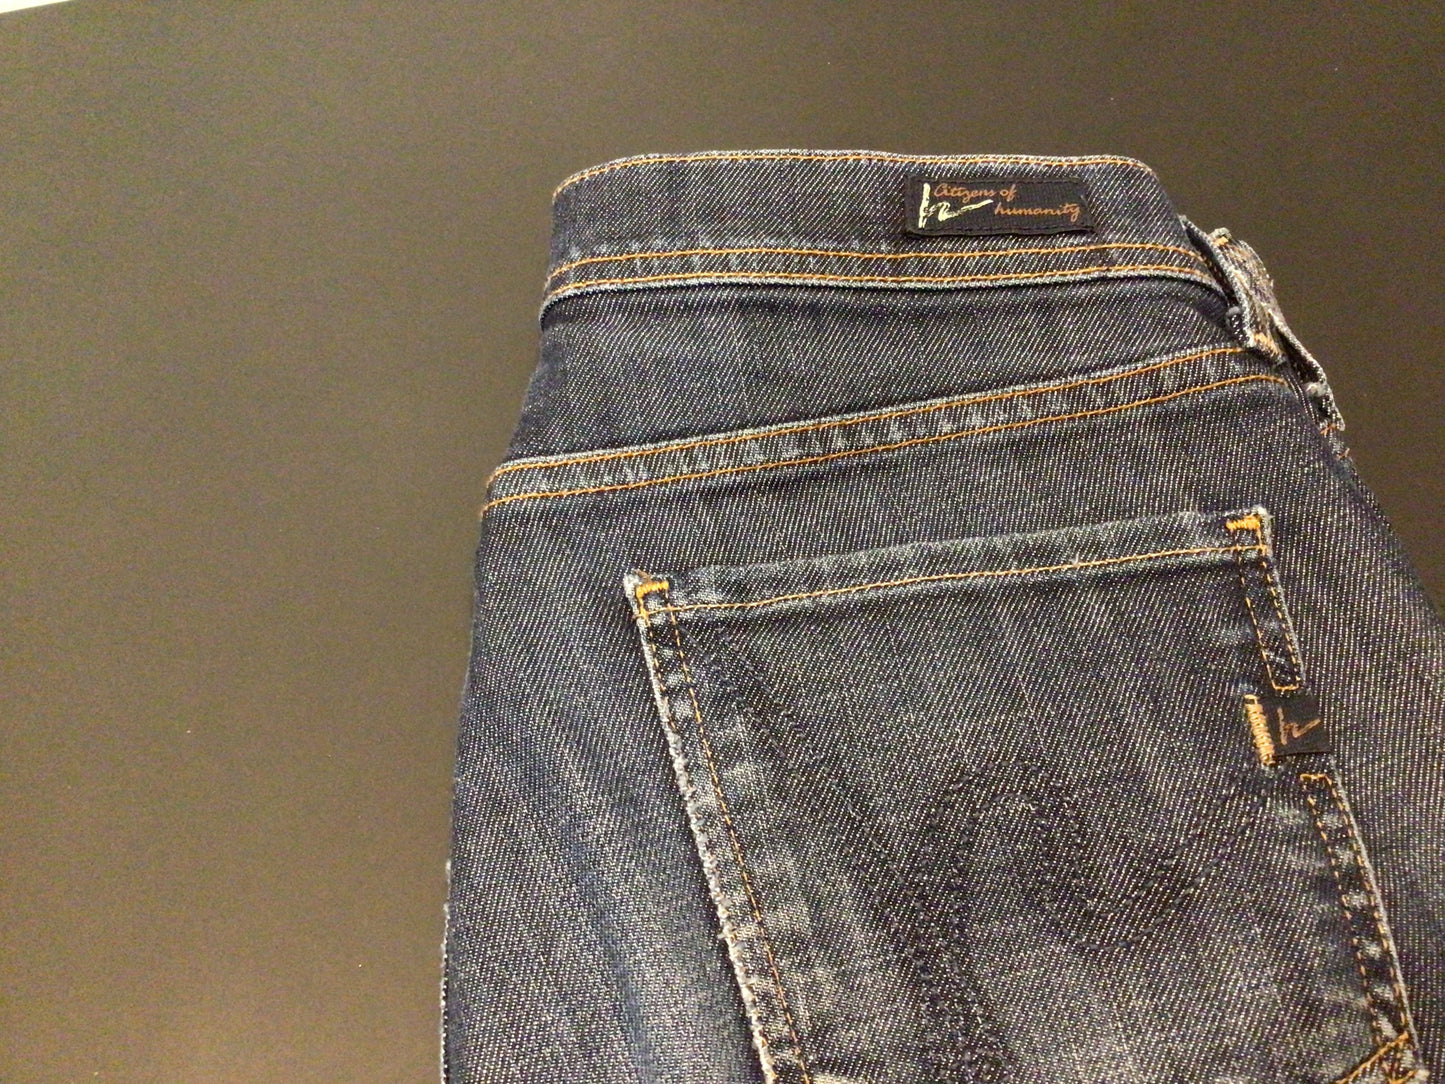 Consignment 1011-04 Citizens of Humanity jeans